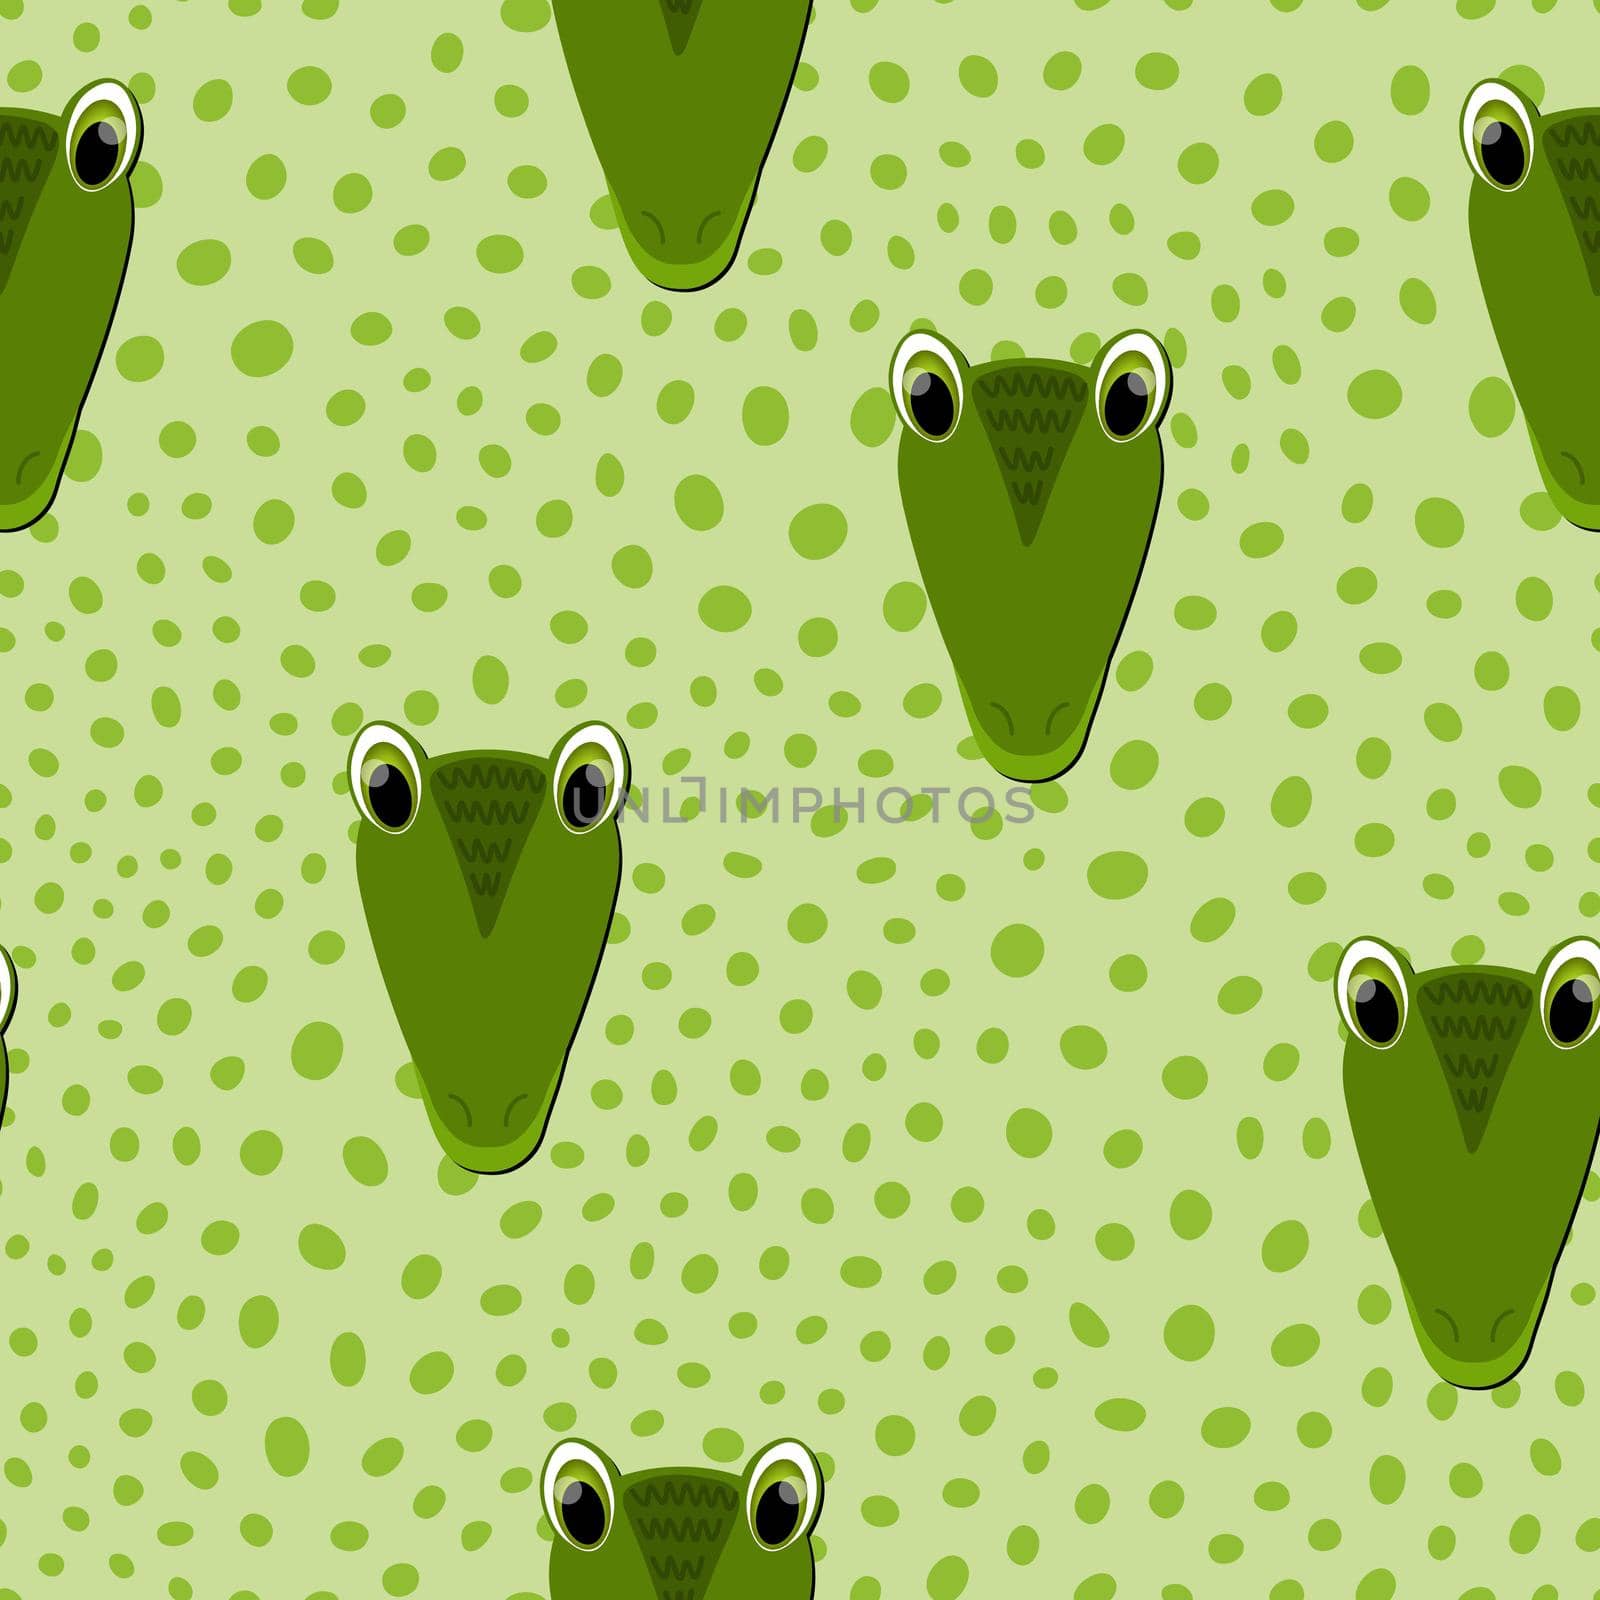 Vector flat animals colorful illustration for kids. Seamless pattern with cute crocodile face on green polka dots background. Adorable cartoon character. Design for card, poster, fabric, textile.